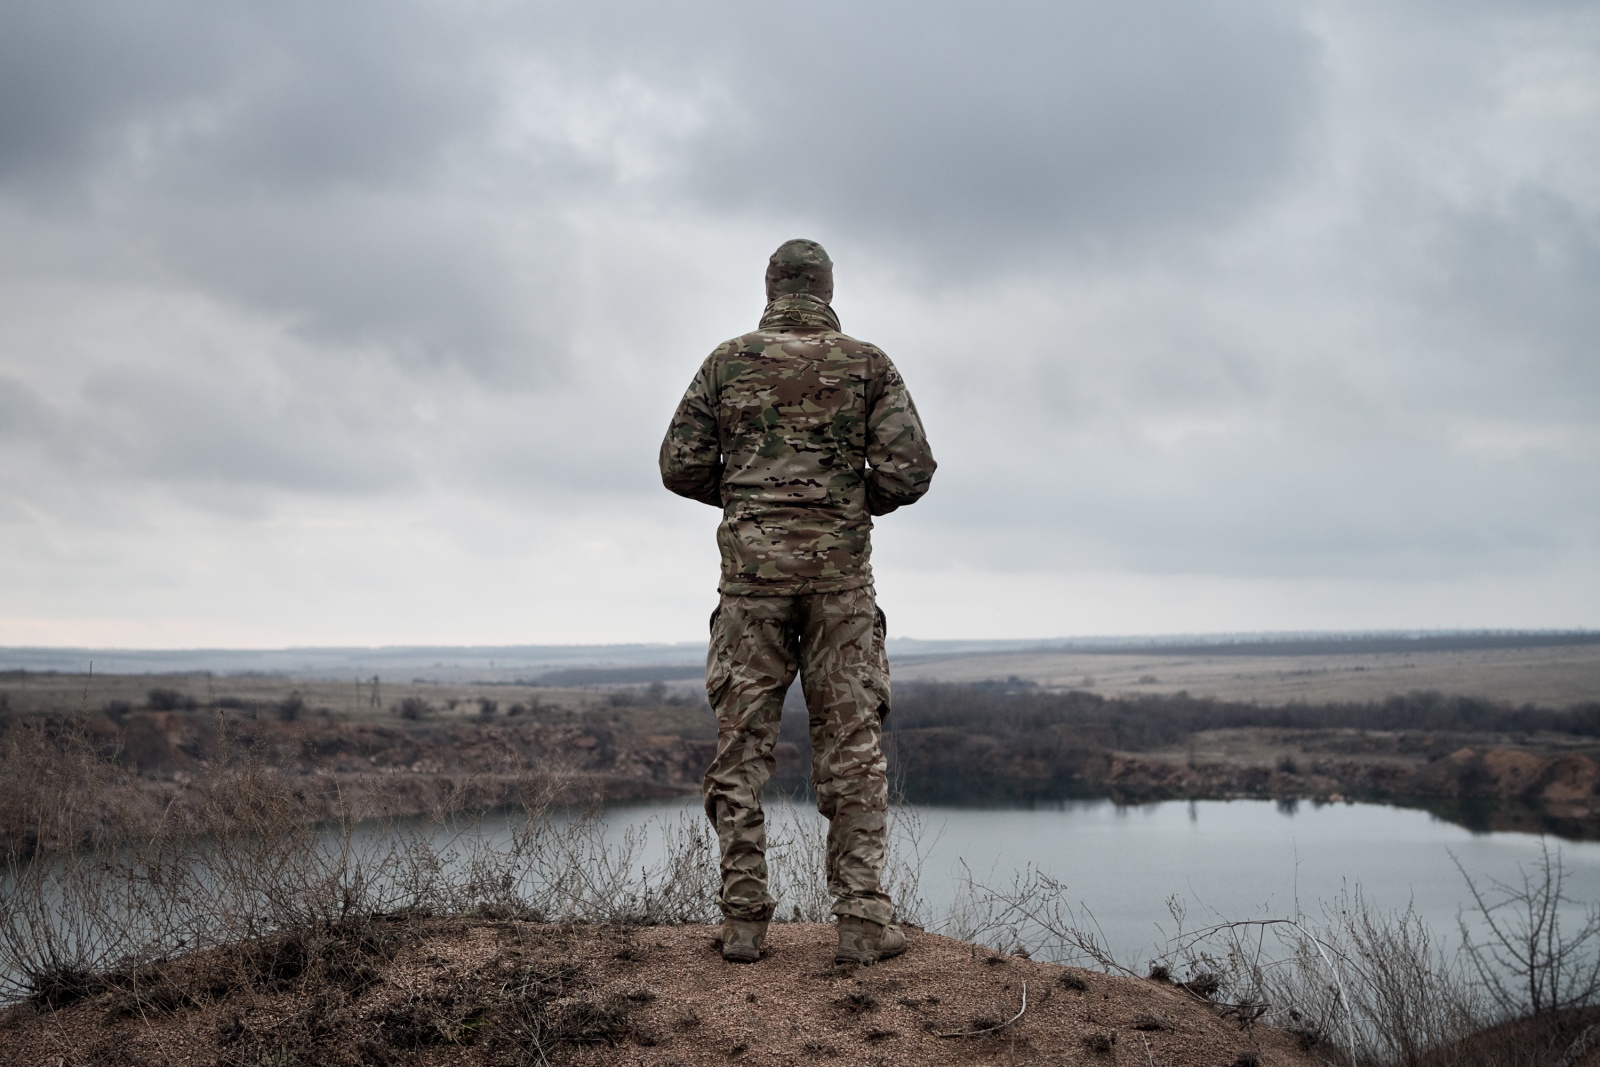 OVER THERE - Volnovakha, Donbas (Ukraine) December 15, 2018
A Ukrainian soldier from the 128 Mechanized Brigade observes the areas occupied by the separatists north of Volnovakha, in the Donbas. On the horizon, the southern front line that reaches Shyrokyne, on the Azov Sea. According to observers of the OSCE SMM international mission, heavy weapons prohibited by the Minsk agreements are often used in combat. This area is considered strategic for the conquest of Mariupol, home of the most important steel plants in the country: the occupation of the town, already invaded by the pro-Russians in 2014 and then freed, would allow separatists to create a corridor to connect Lugansk and Donetsk to Crimea, the Ukrainian peninsula which in 2014 declared independence thanks to Russia's political and military support.
